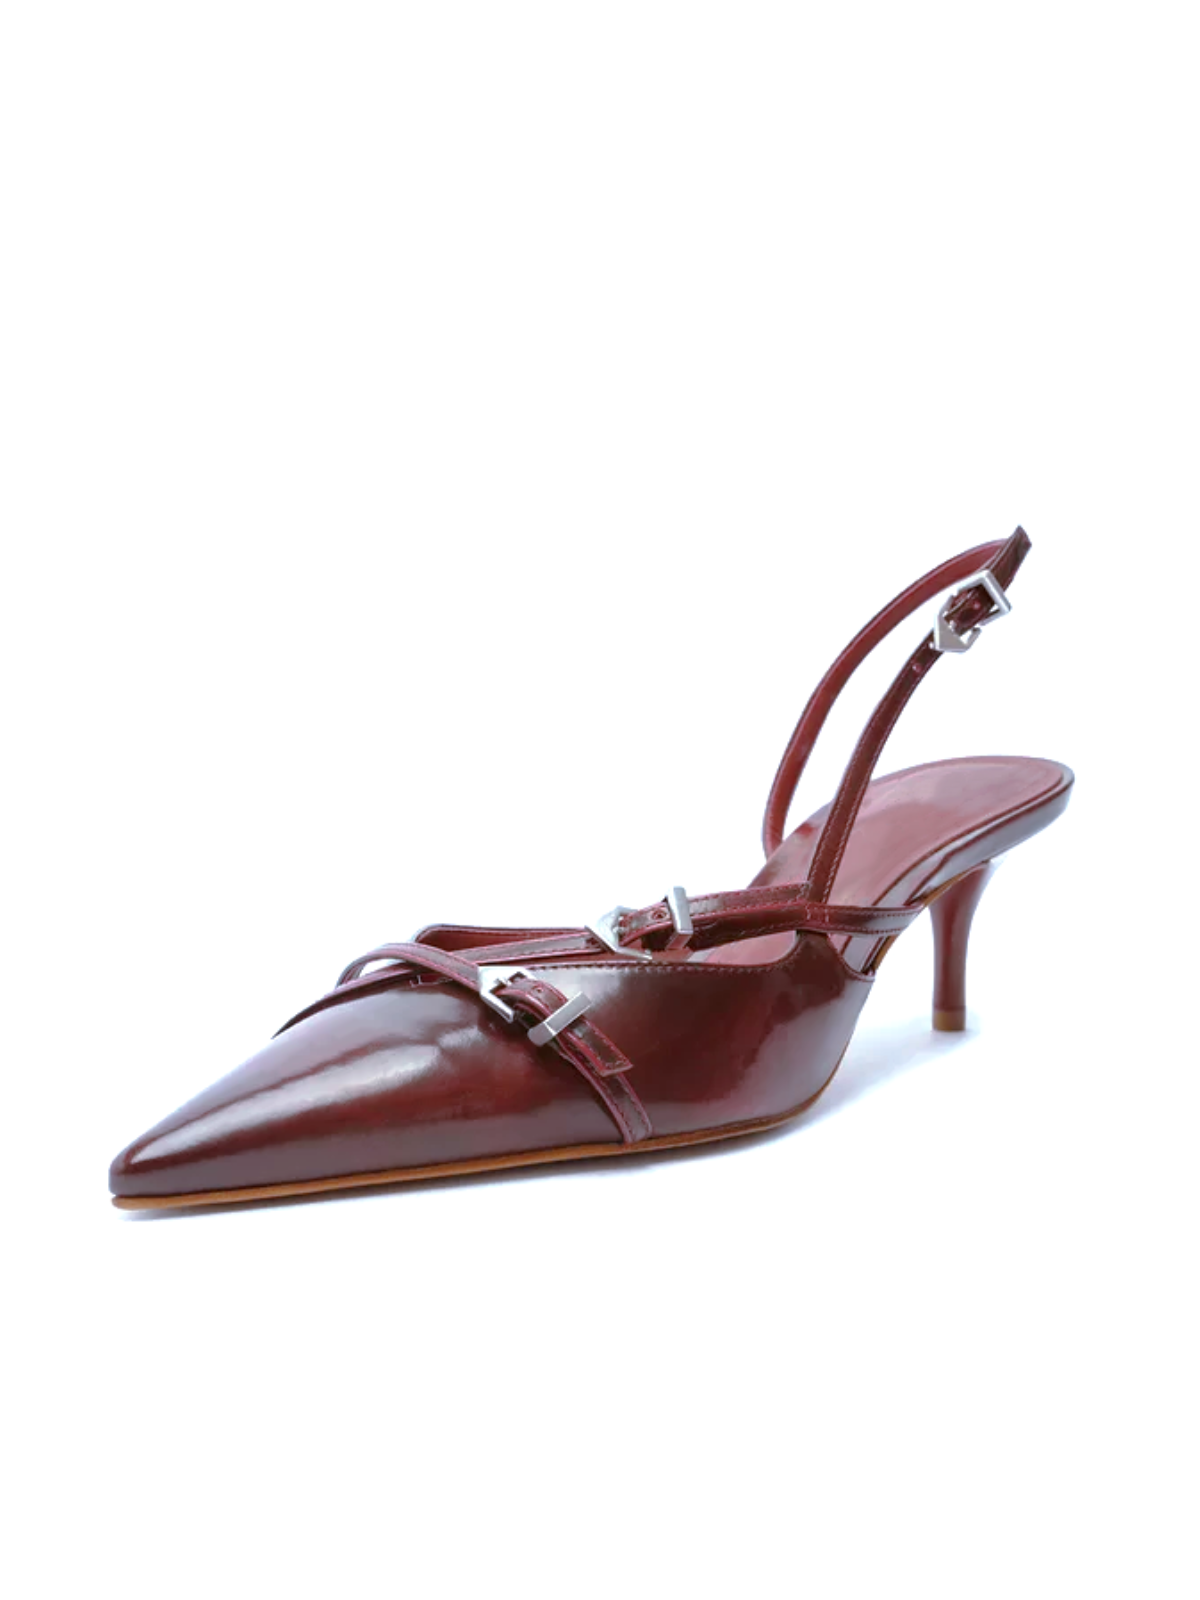 Varnish Cherry Red Buckled Strappy Kitten Heels Slingback Courts Scarpin Pumps